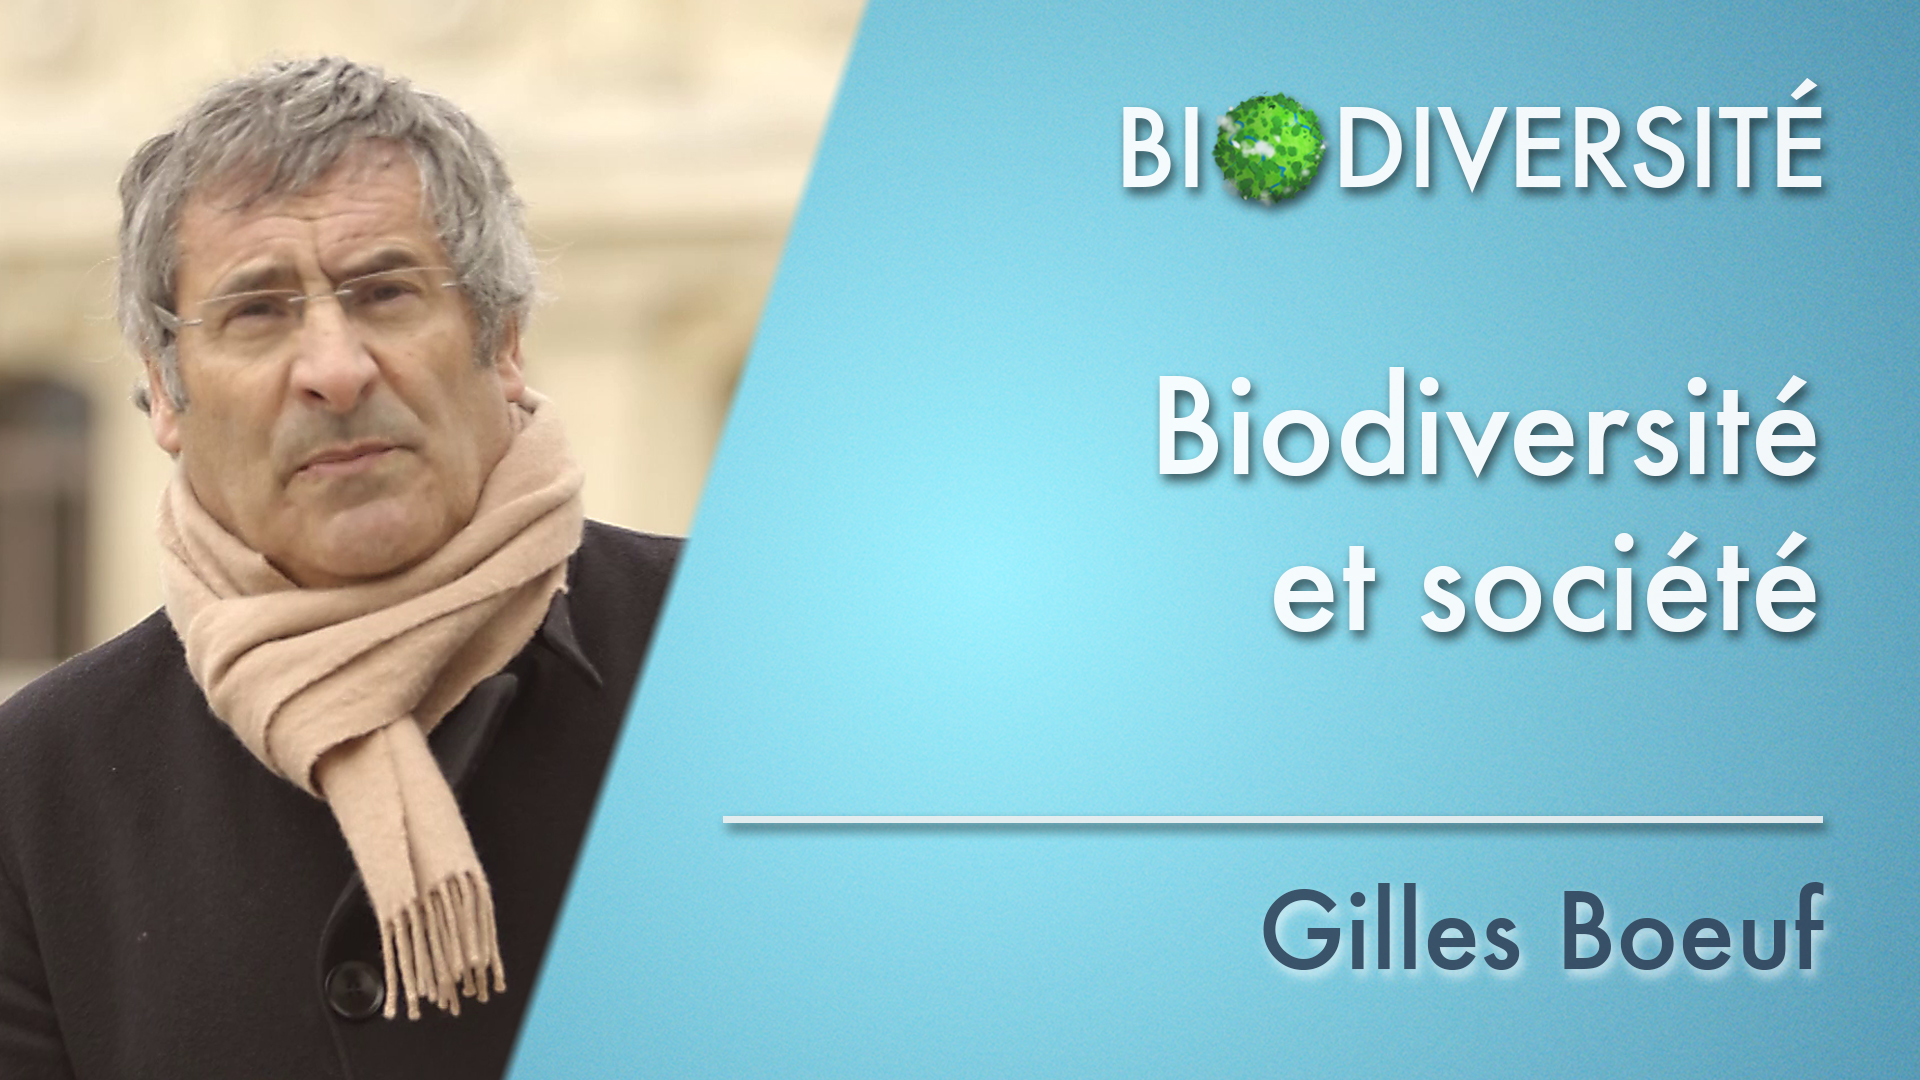 Biodiversity and society - Introduction